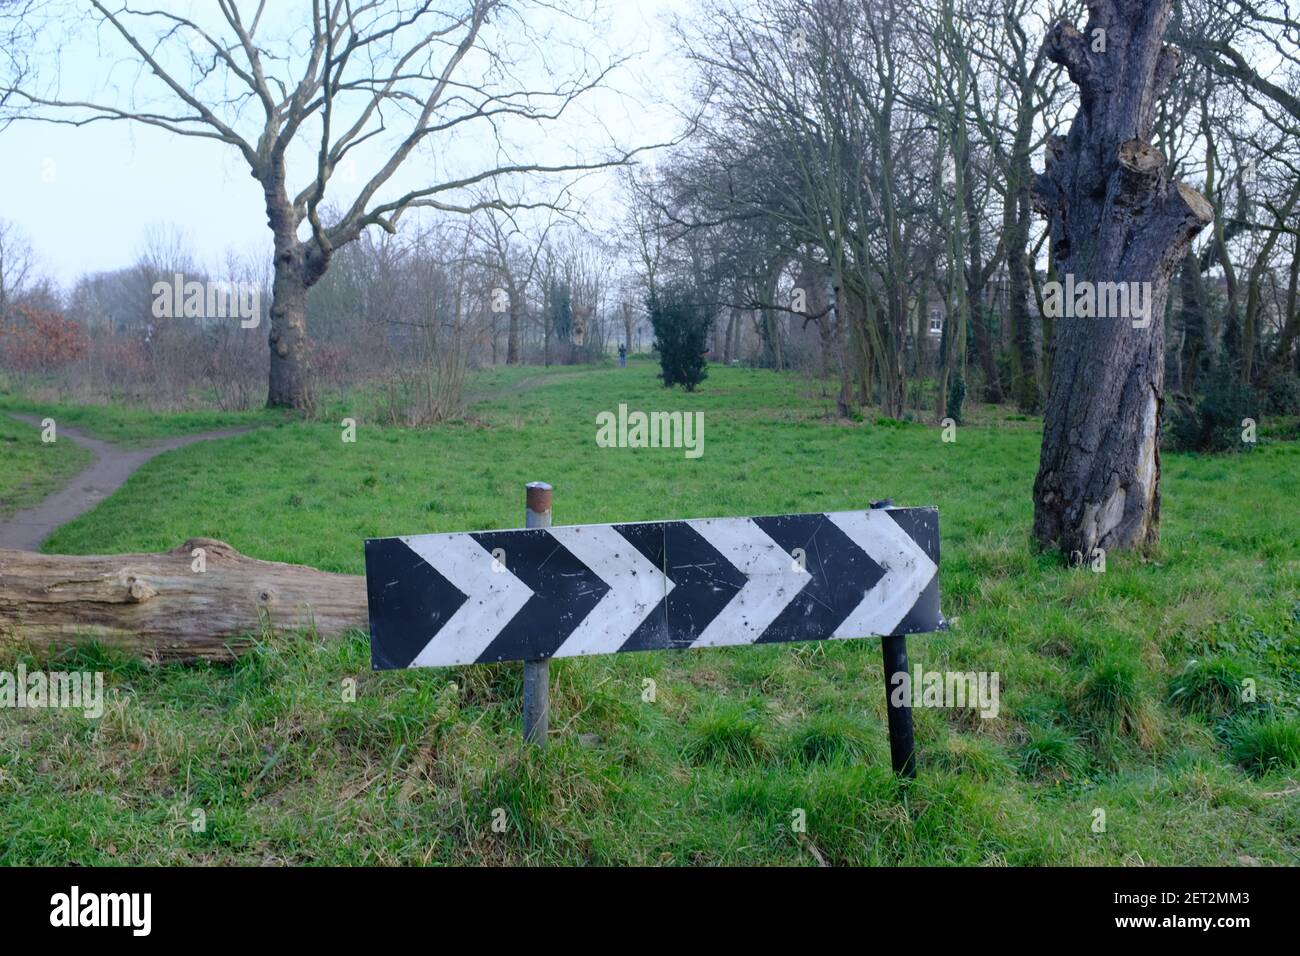 LONDON - 1ST MARCH 2021: A right turn direction chevron on the edge of Wanstead Flats in East London. Stock Photo